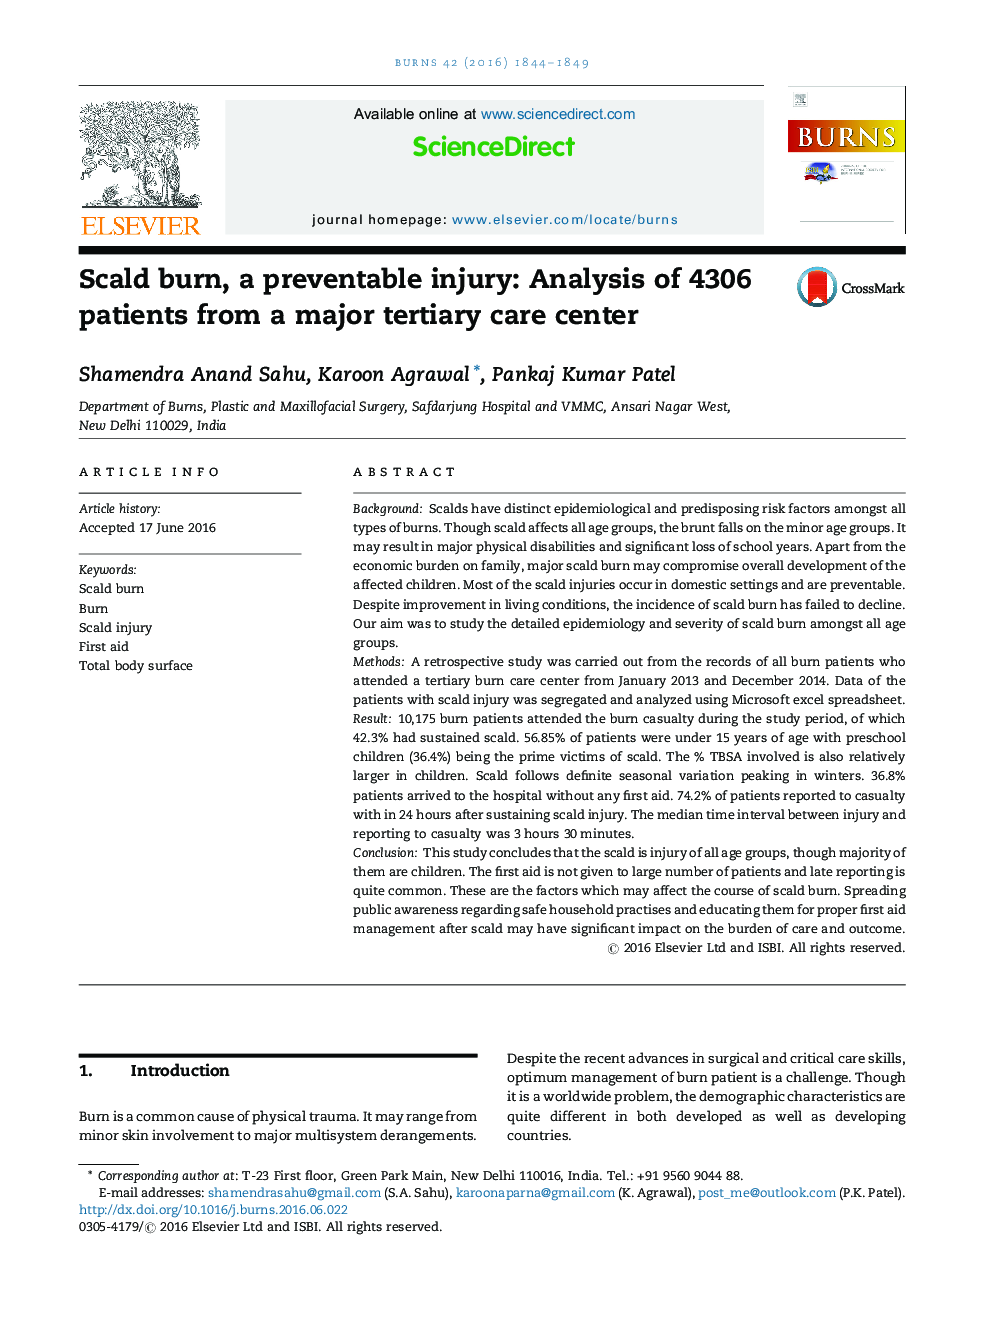 Scald burn, a preventable injury: Analysis of 4306 patients from a major tertiary care center